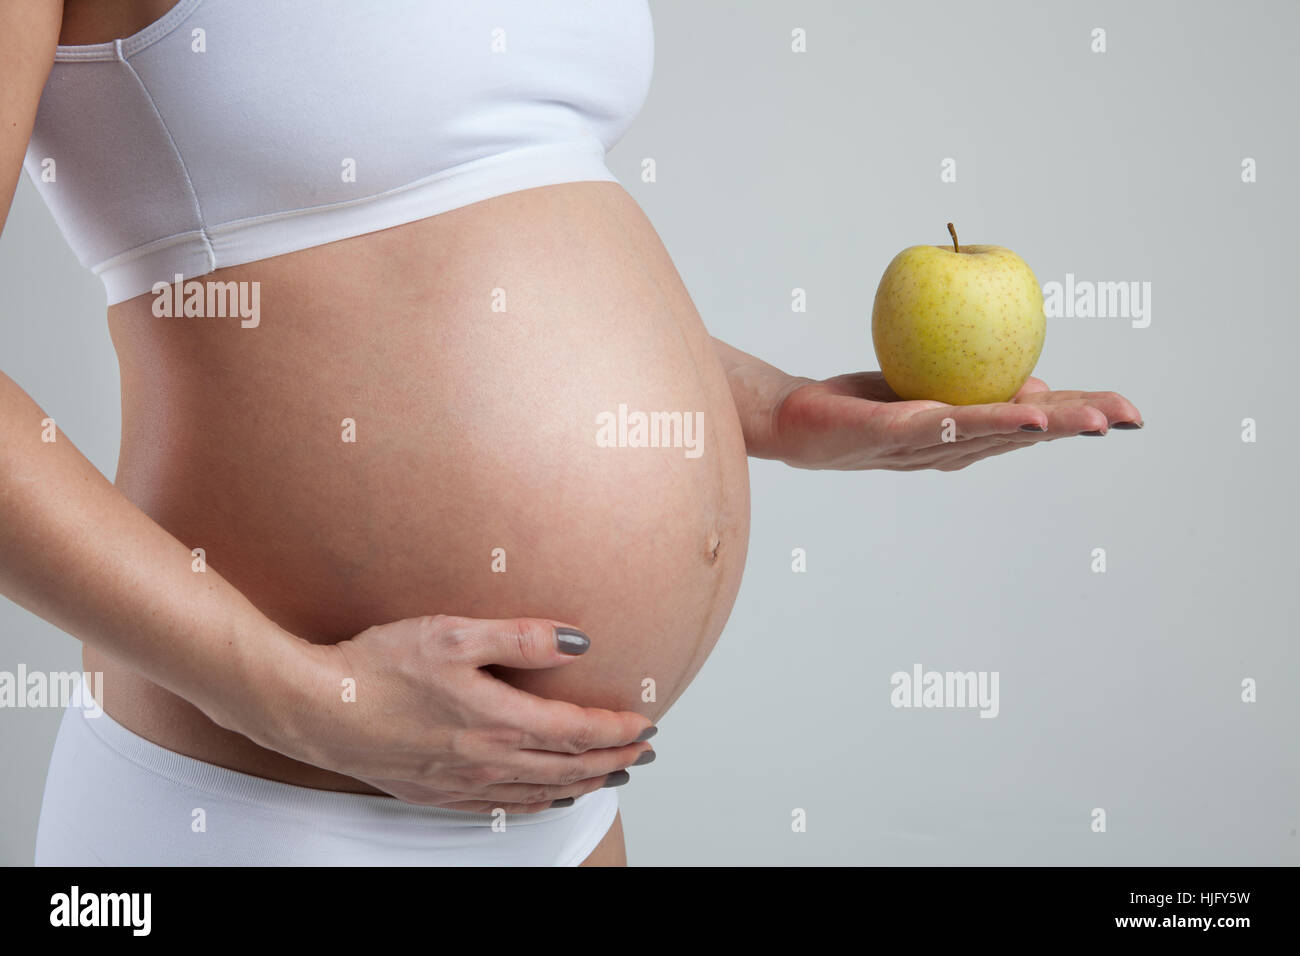 Belly of a pregnant woman with green apple on her hand Stock Photo